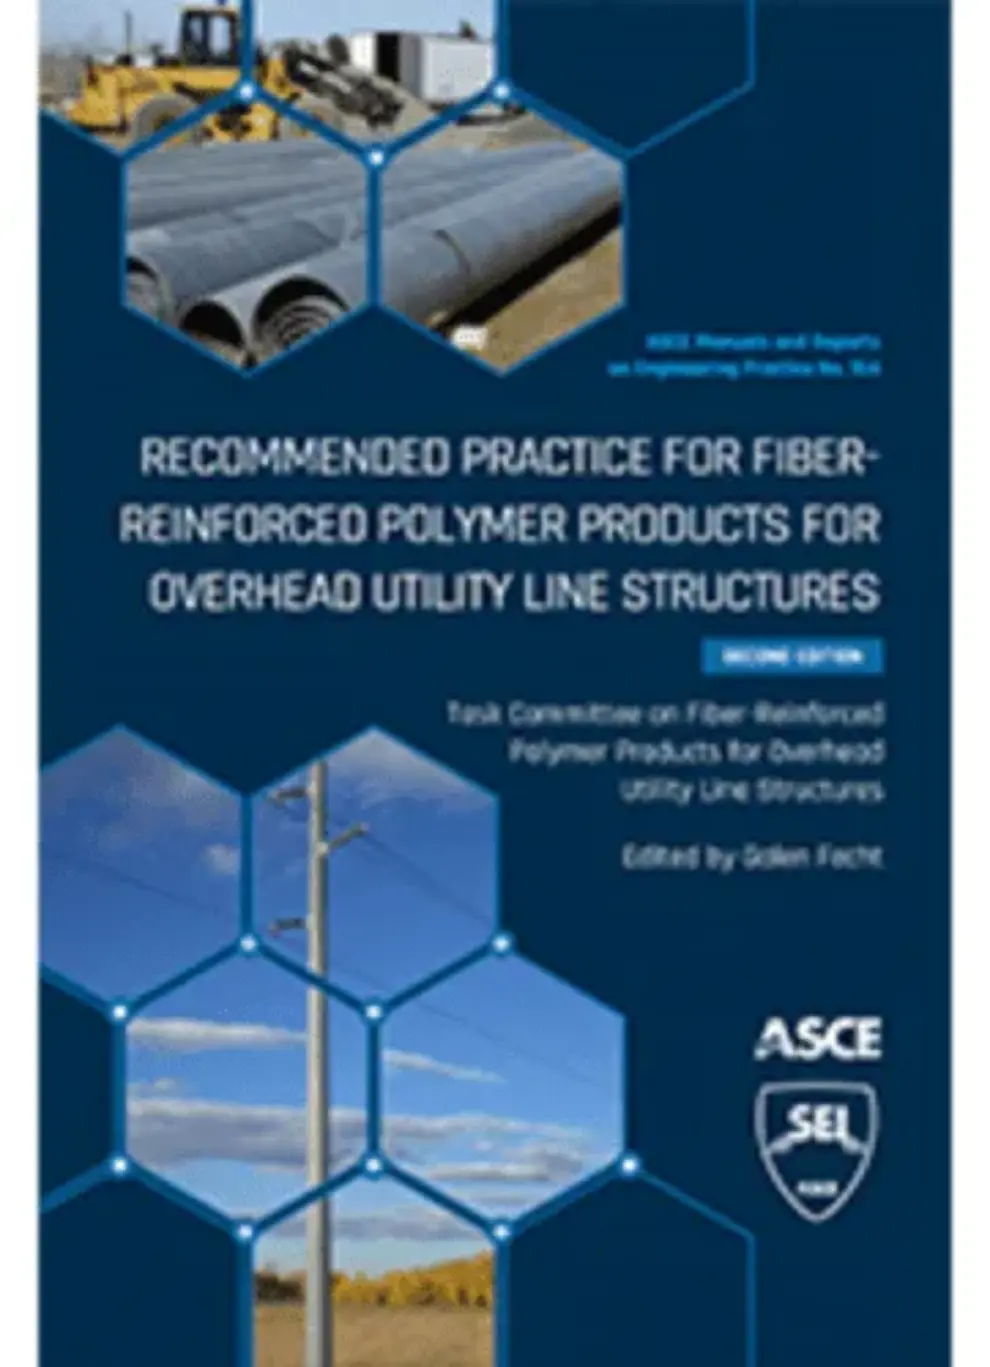 New ASCE Manual of Practice Offers Best Practices for Use of Fiber-Reinforced Polymers for Utility Lines